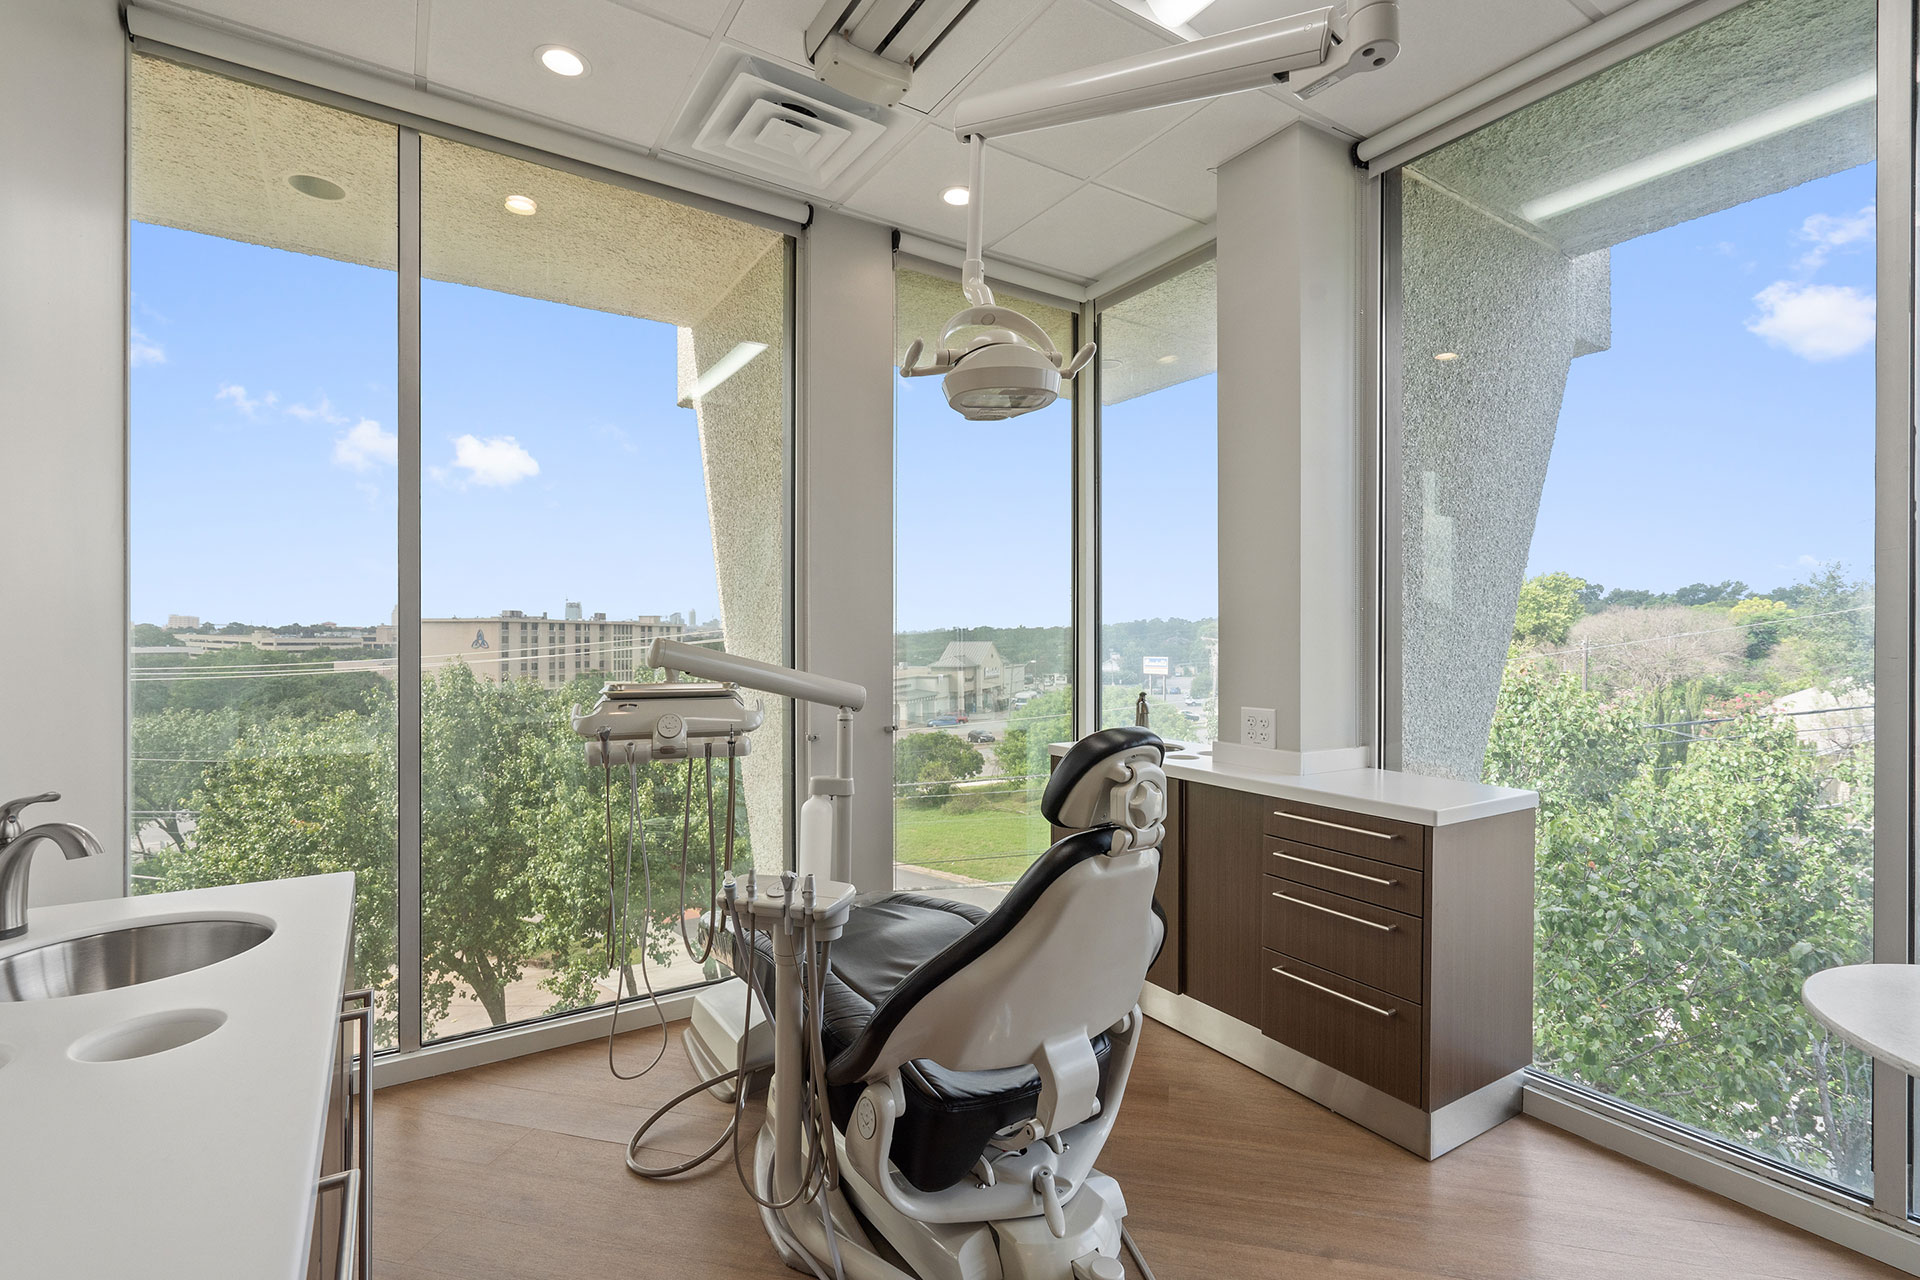 Are you ready for a smile transformation from Gary Cash, DDS in Austin, TX